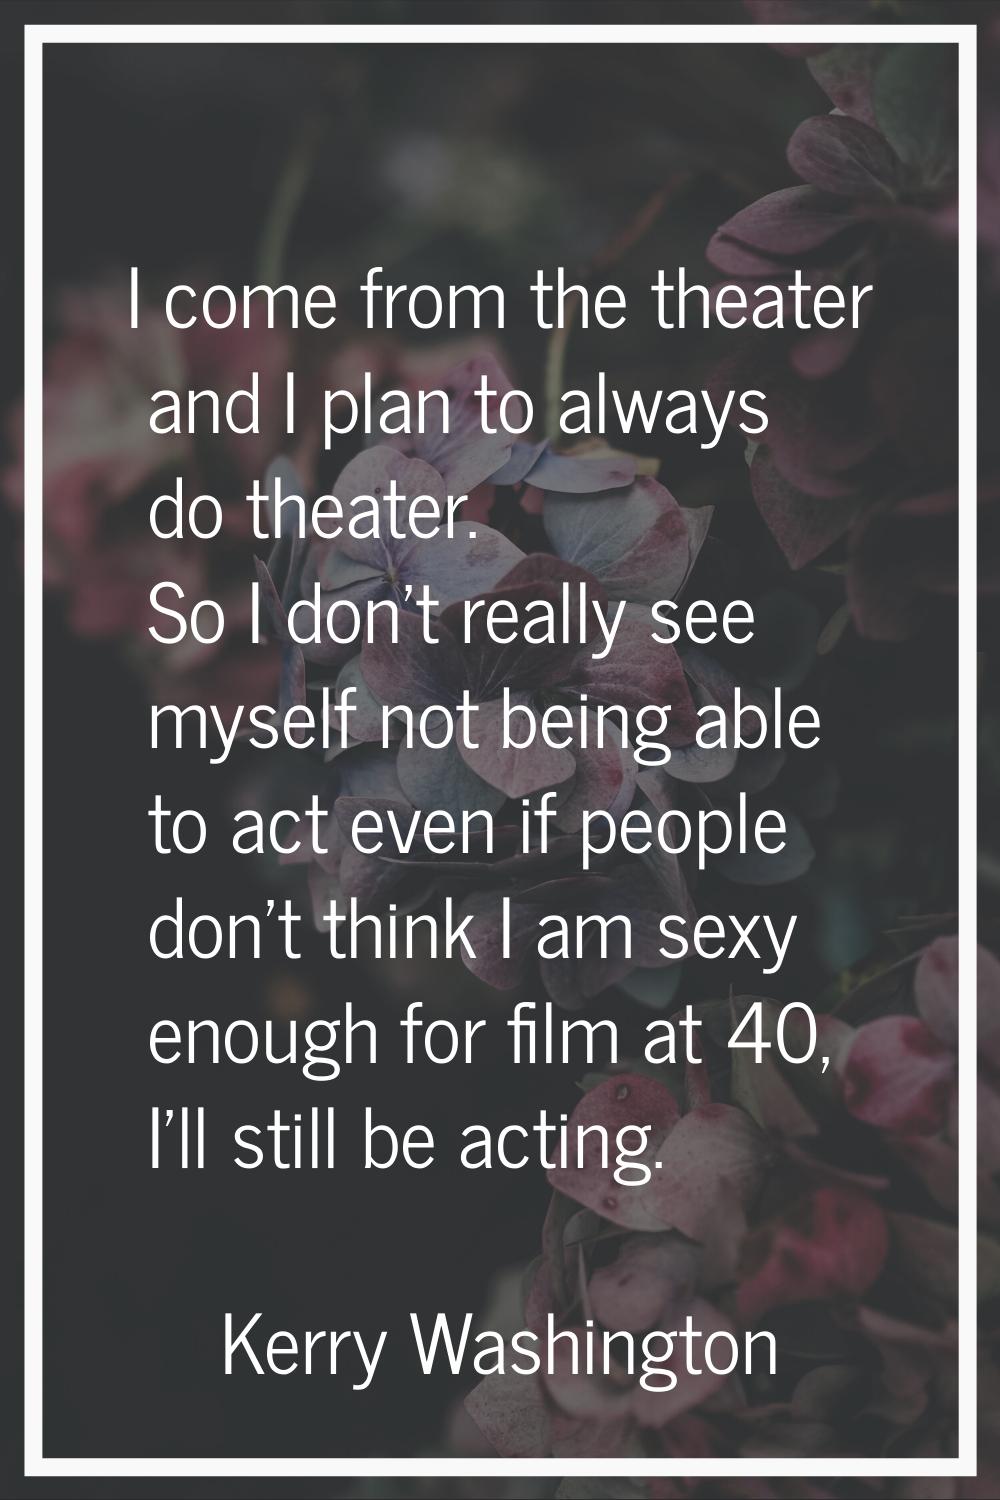 I come from the theater and I plan to always do theater. So I don't really see myself not being abl